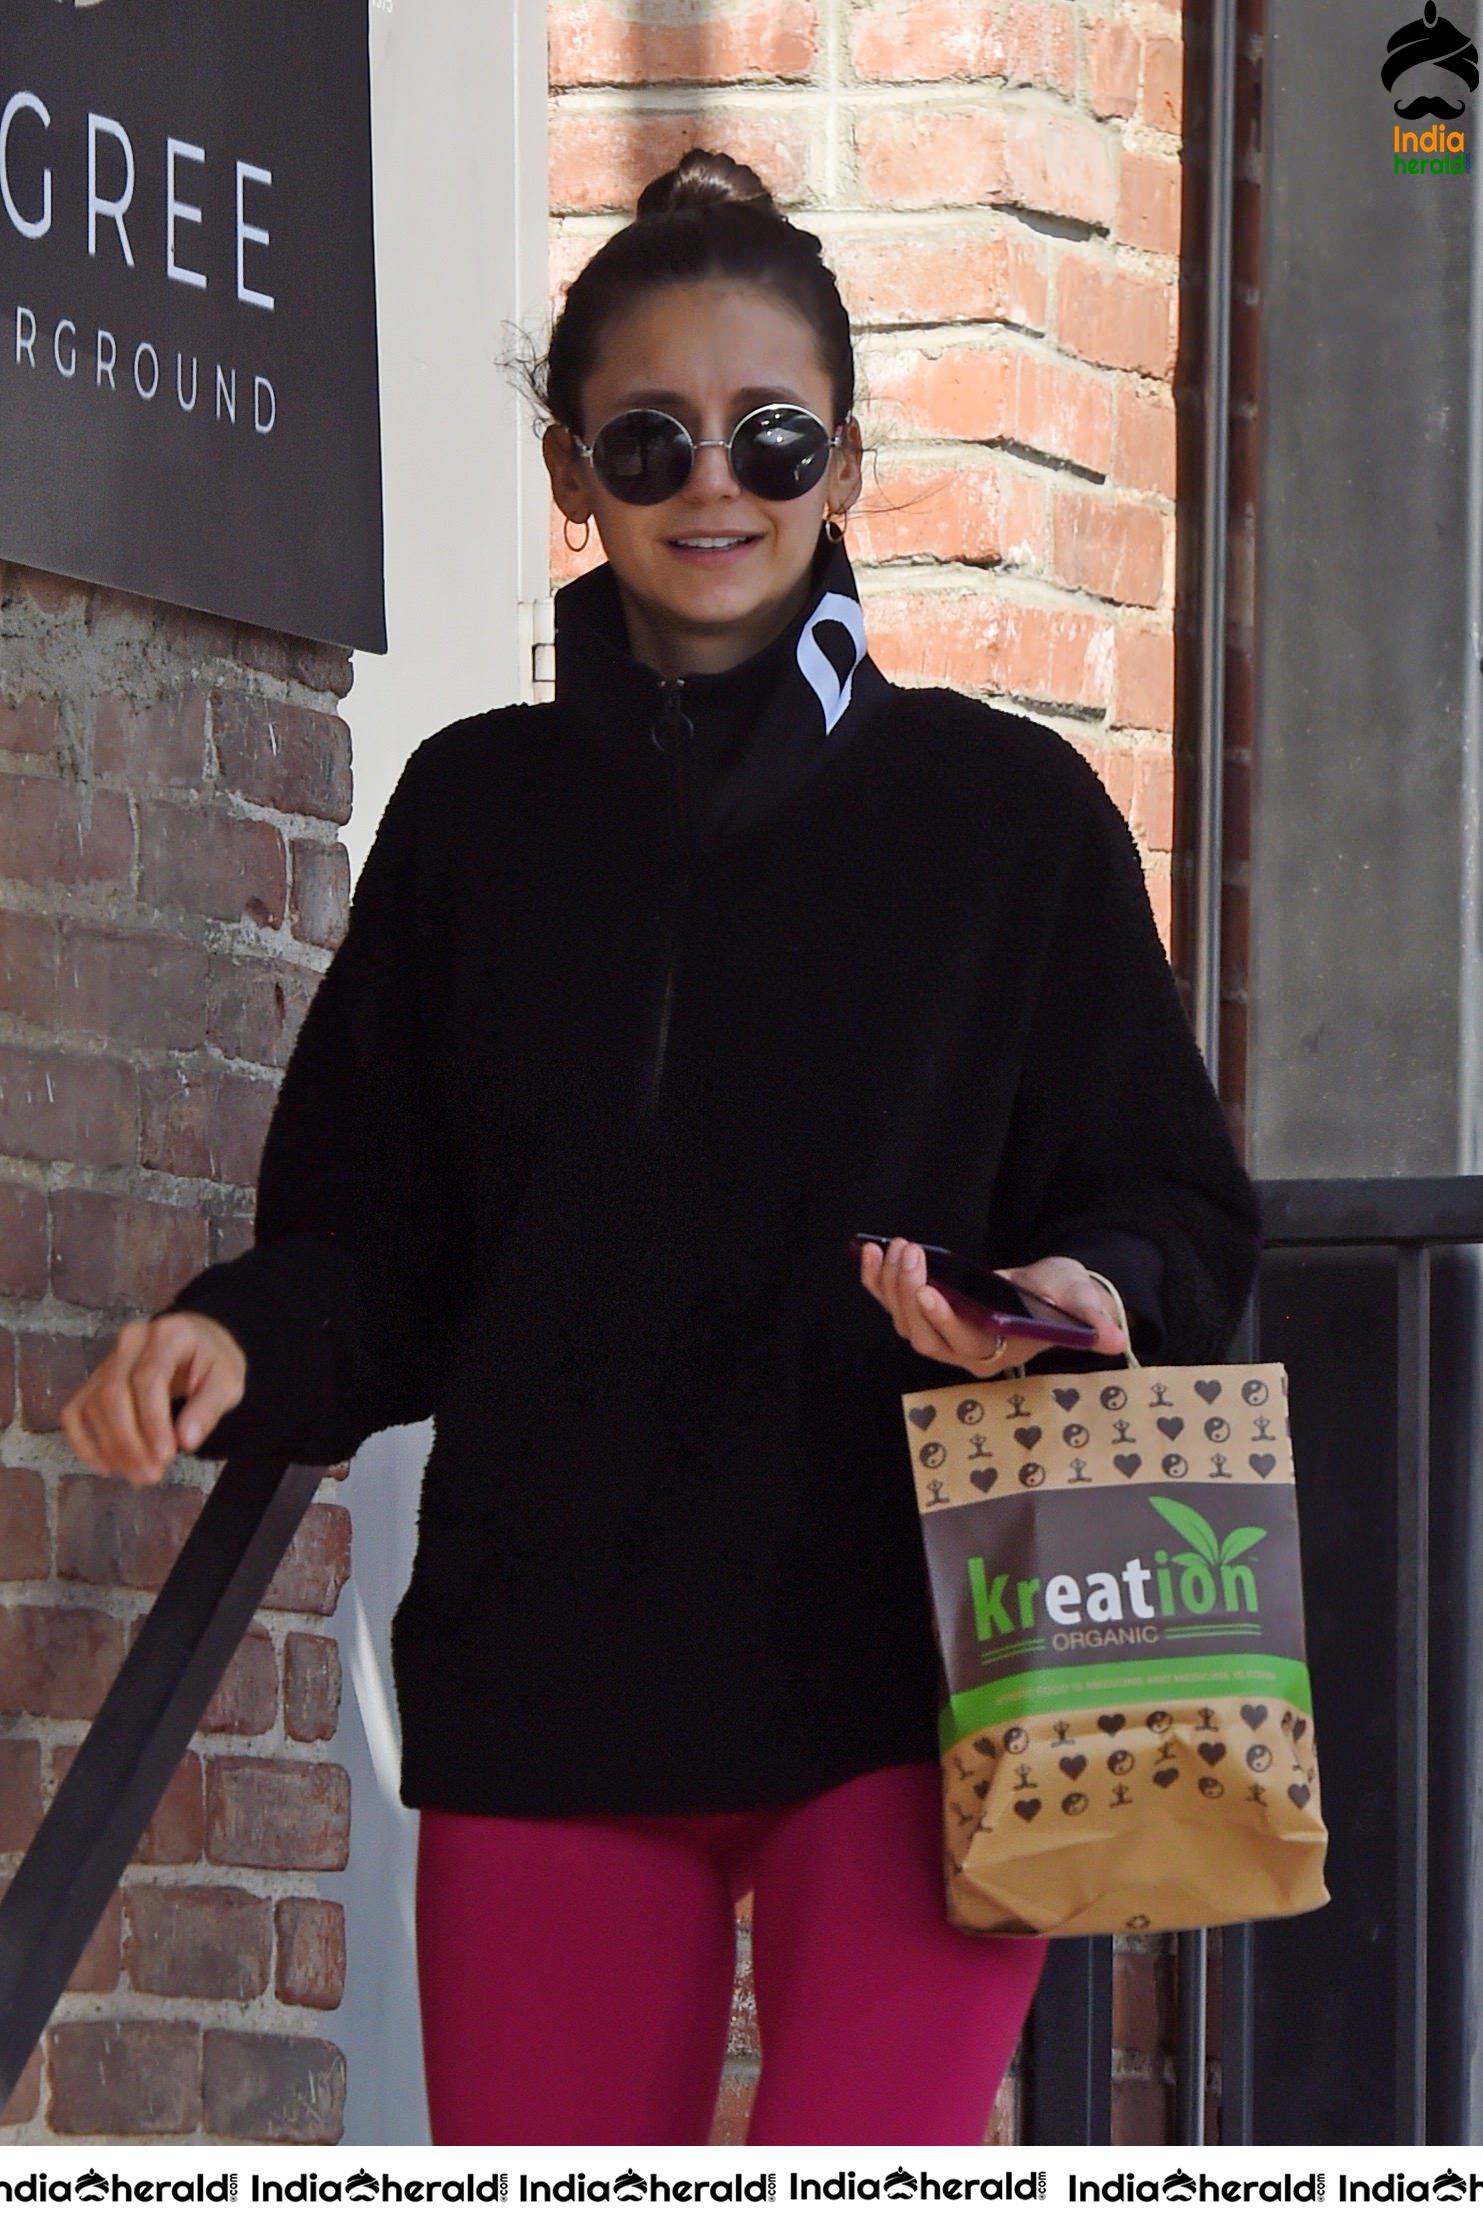 Nina Dobrev Leaving a Workout in West Hollywood